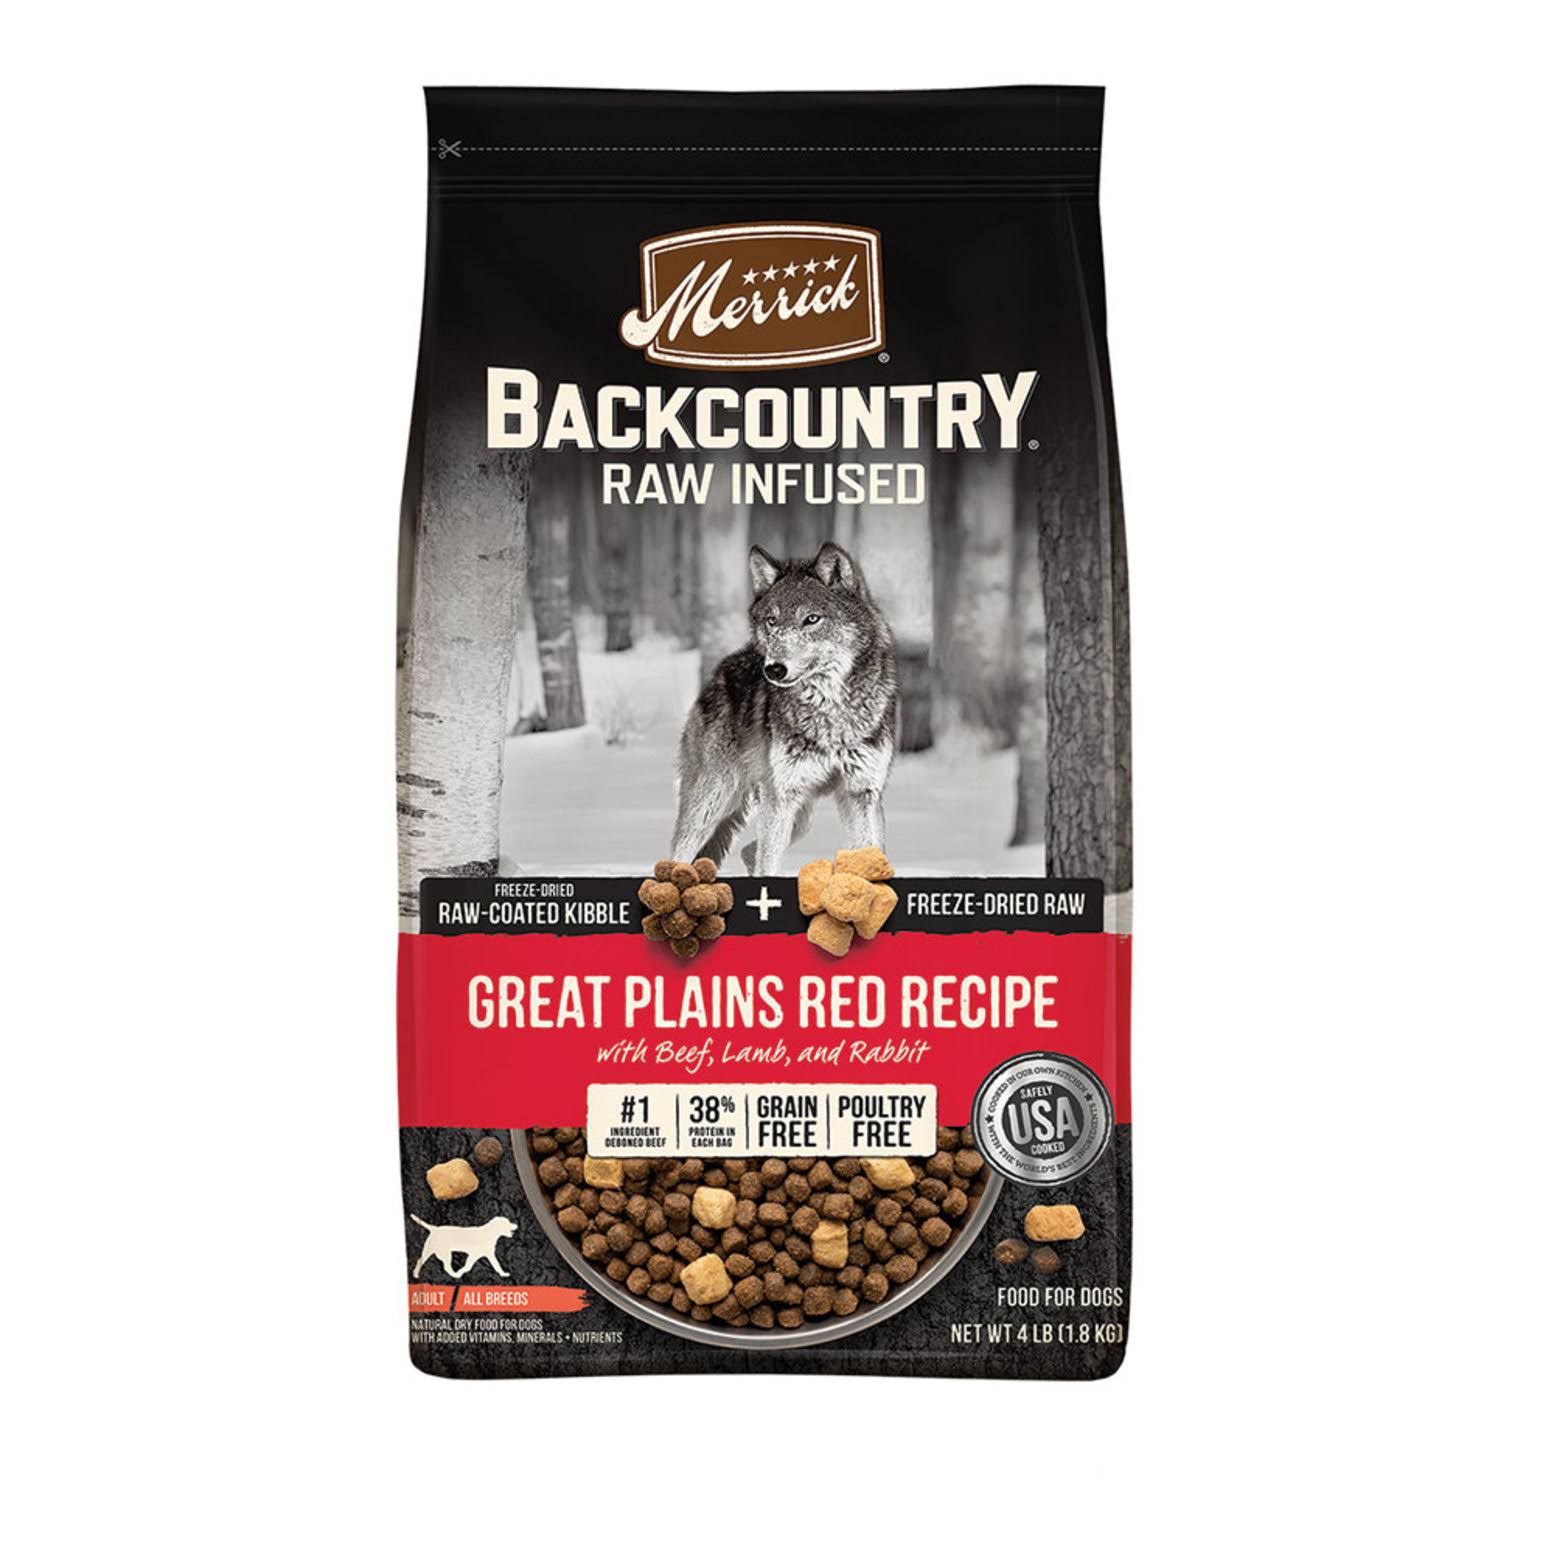 Merrick Grain Free Backcountry Raw Infused Great Plains Red | Dog Food | Size: 1.81 kg